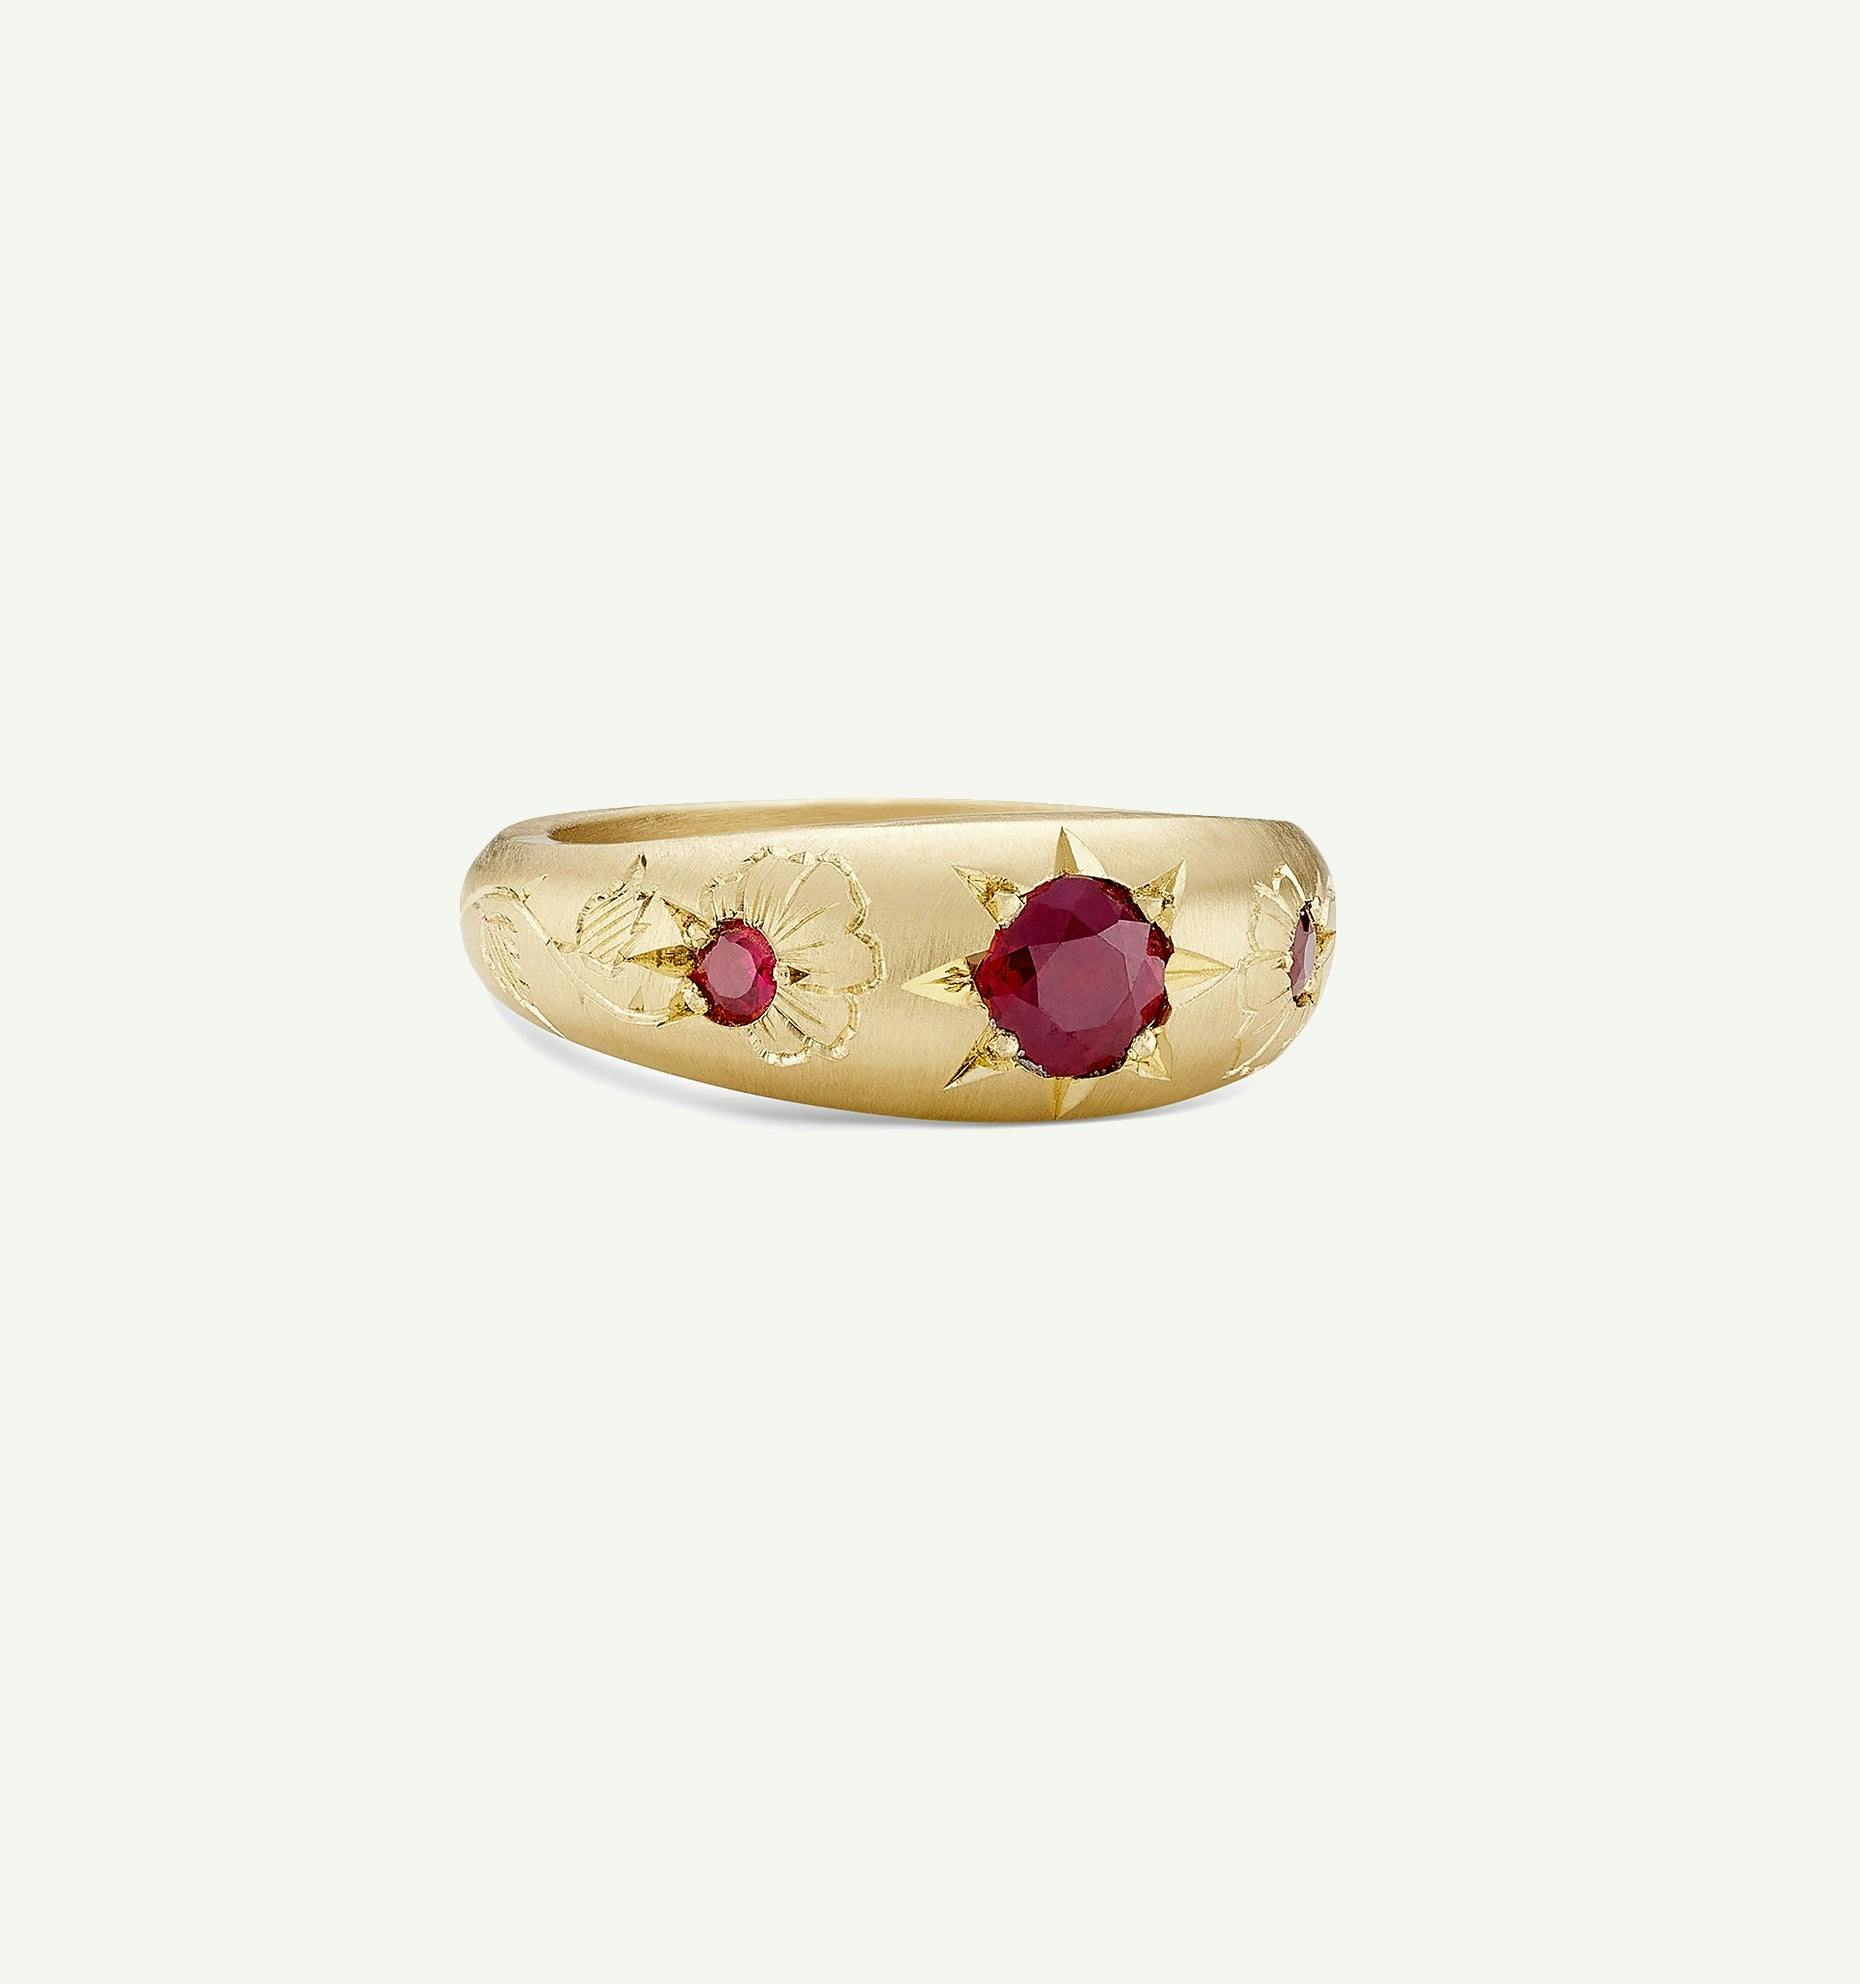 18kt yellow gold and rubies Wild Rosebud ring